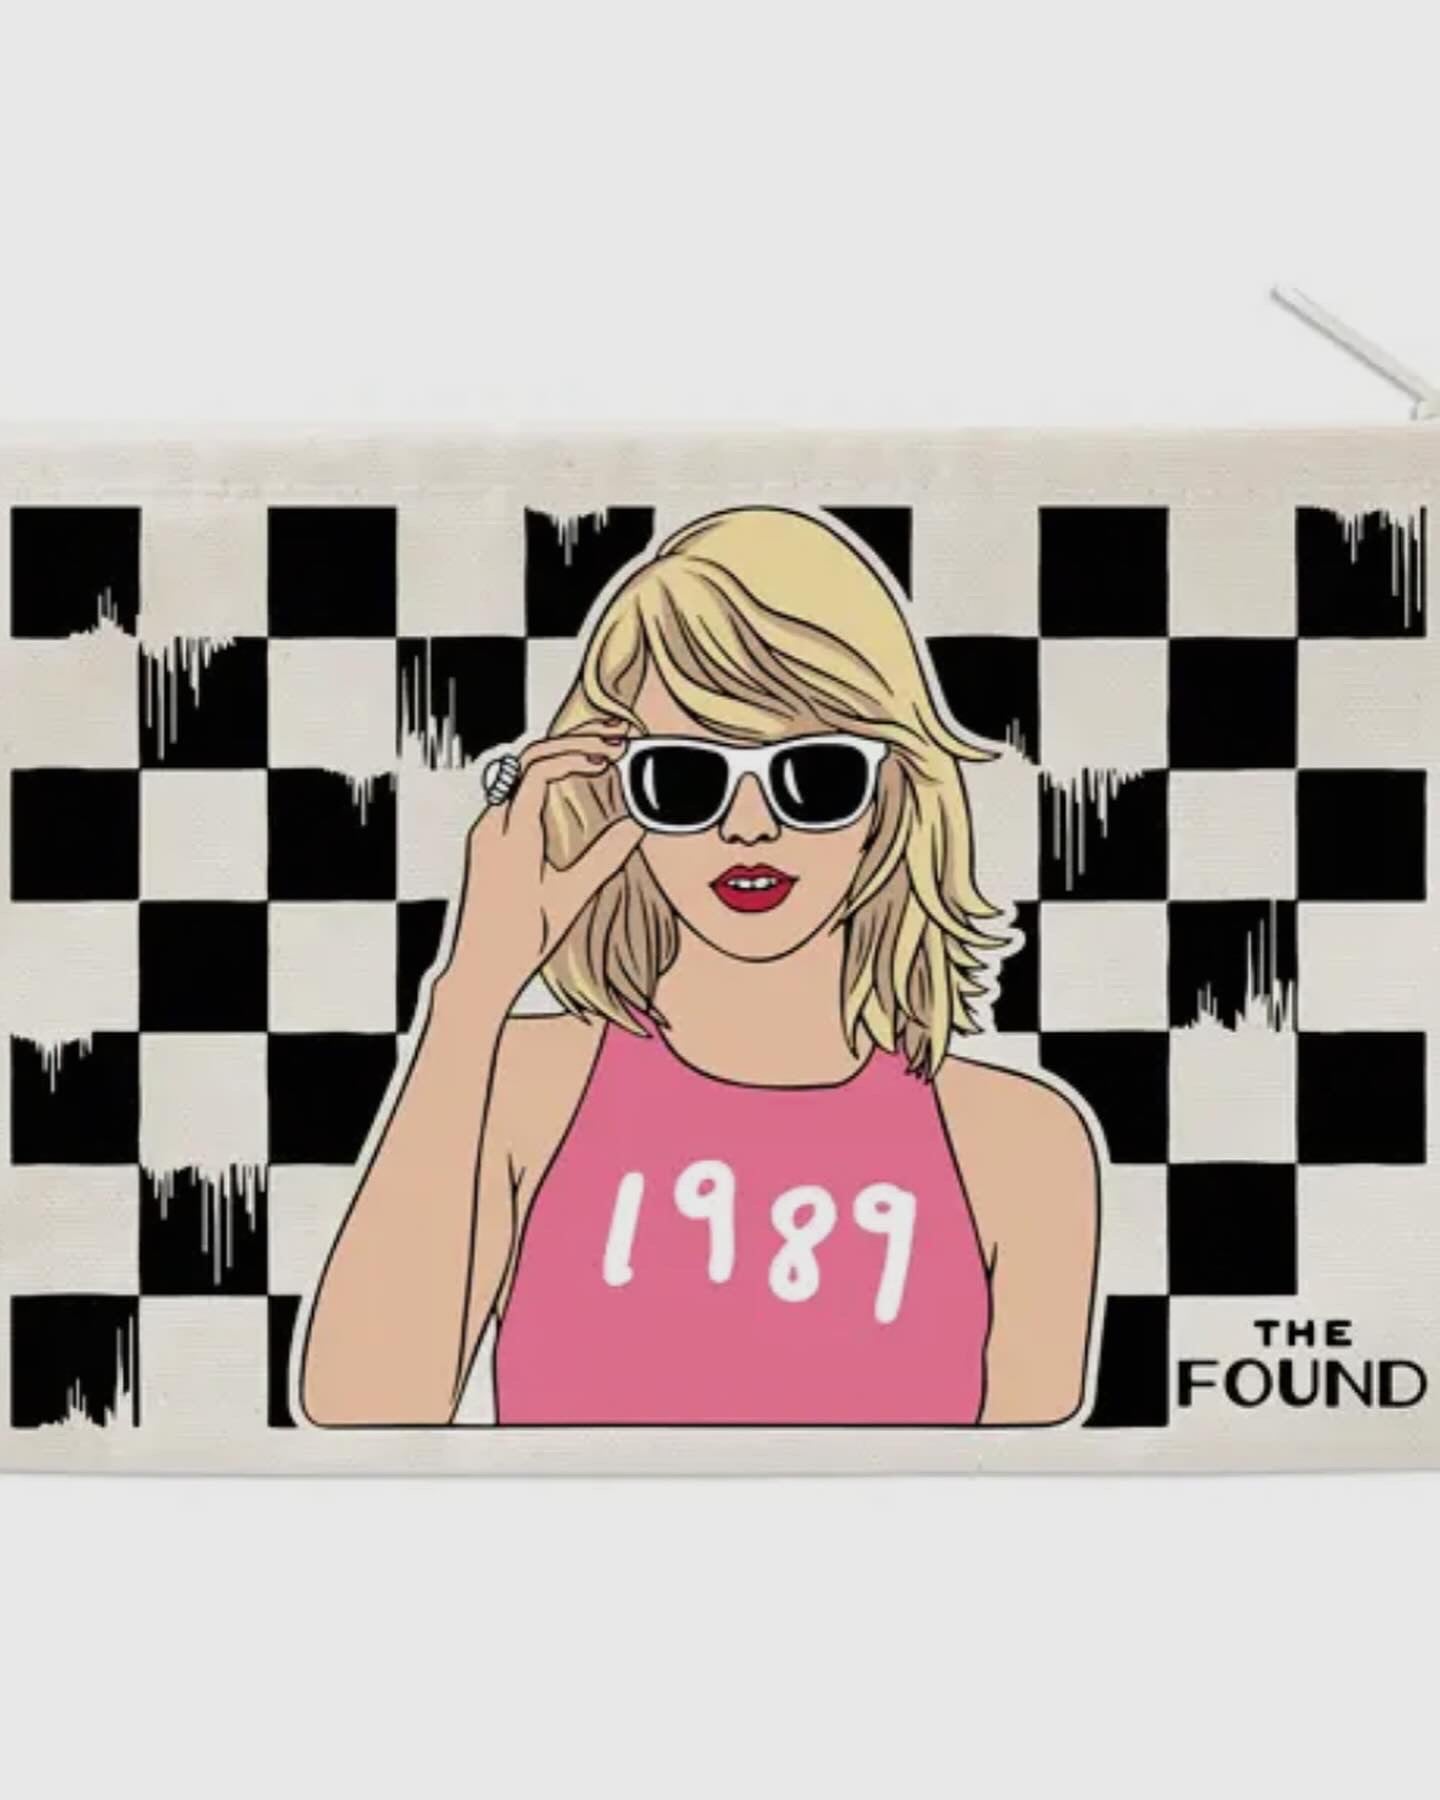 Taylor 1989 Pouch